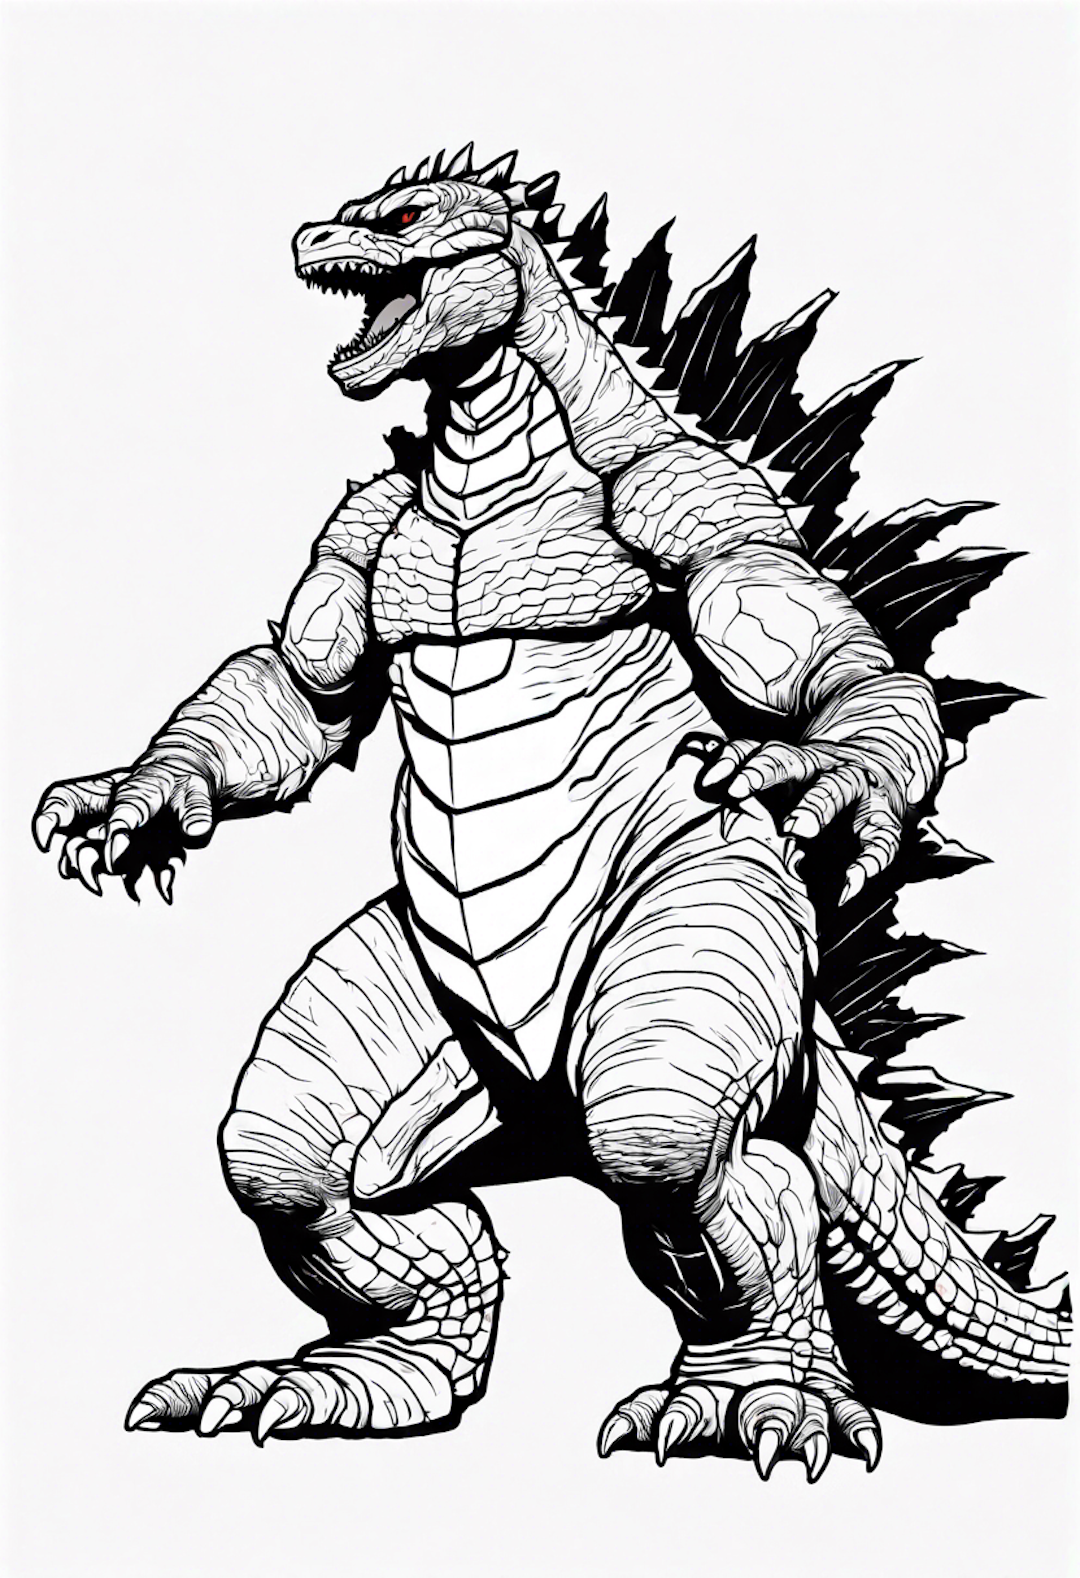 Godzilla the king of monsters